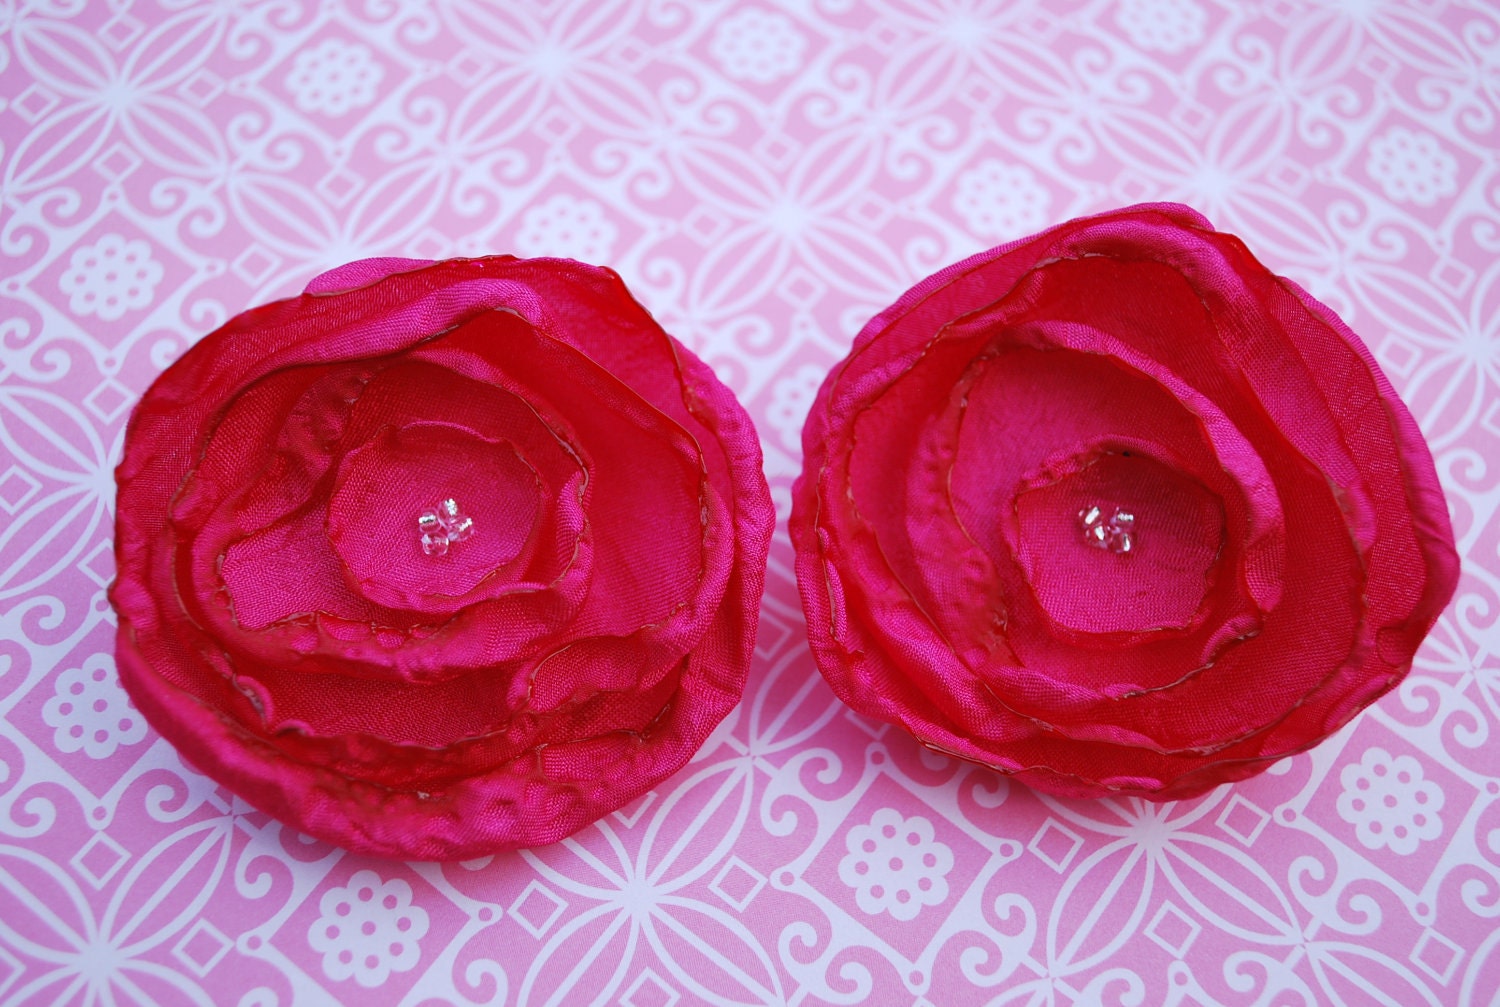 2 Bright Pink Fabric Flower Accessory Clips for Shoes, Purses, Clothes and More